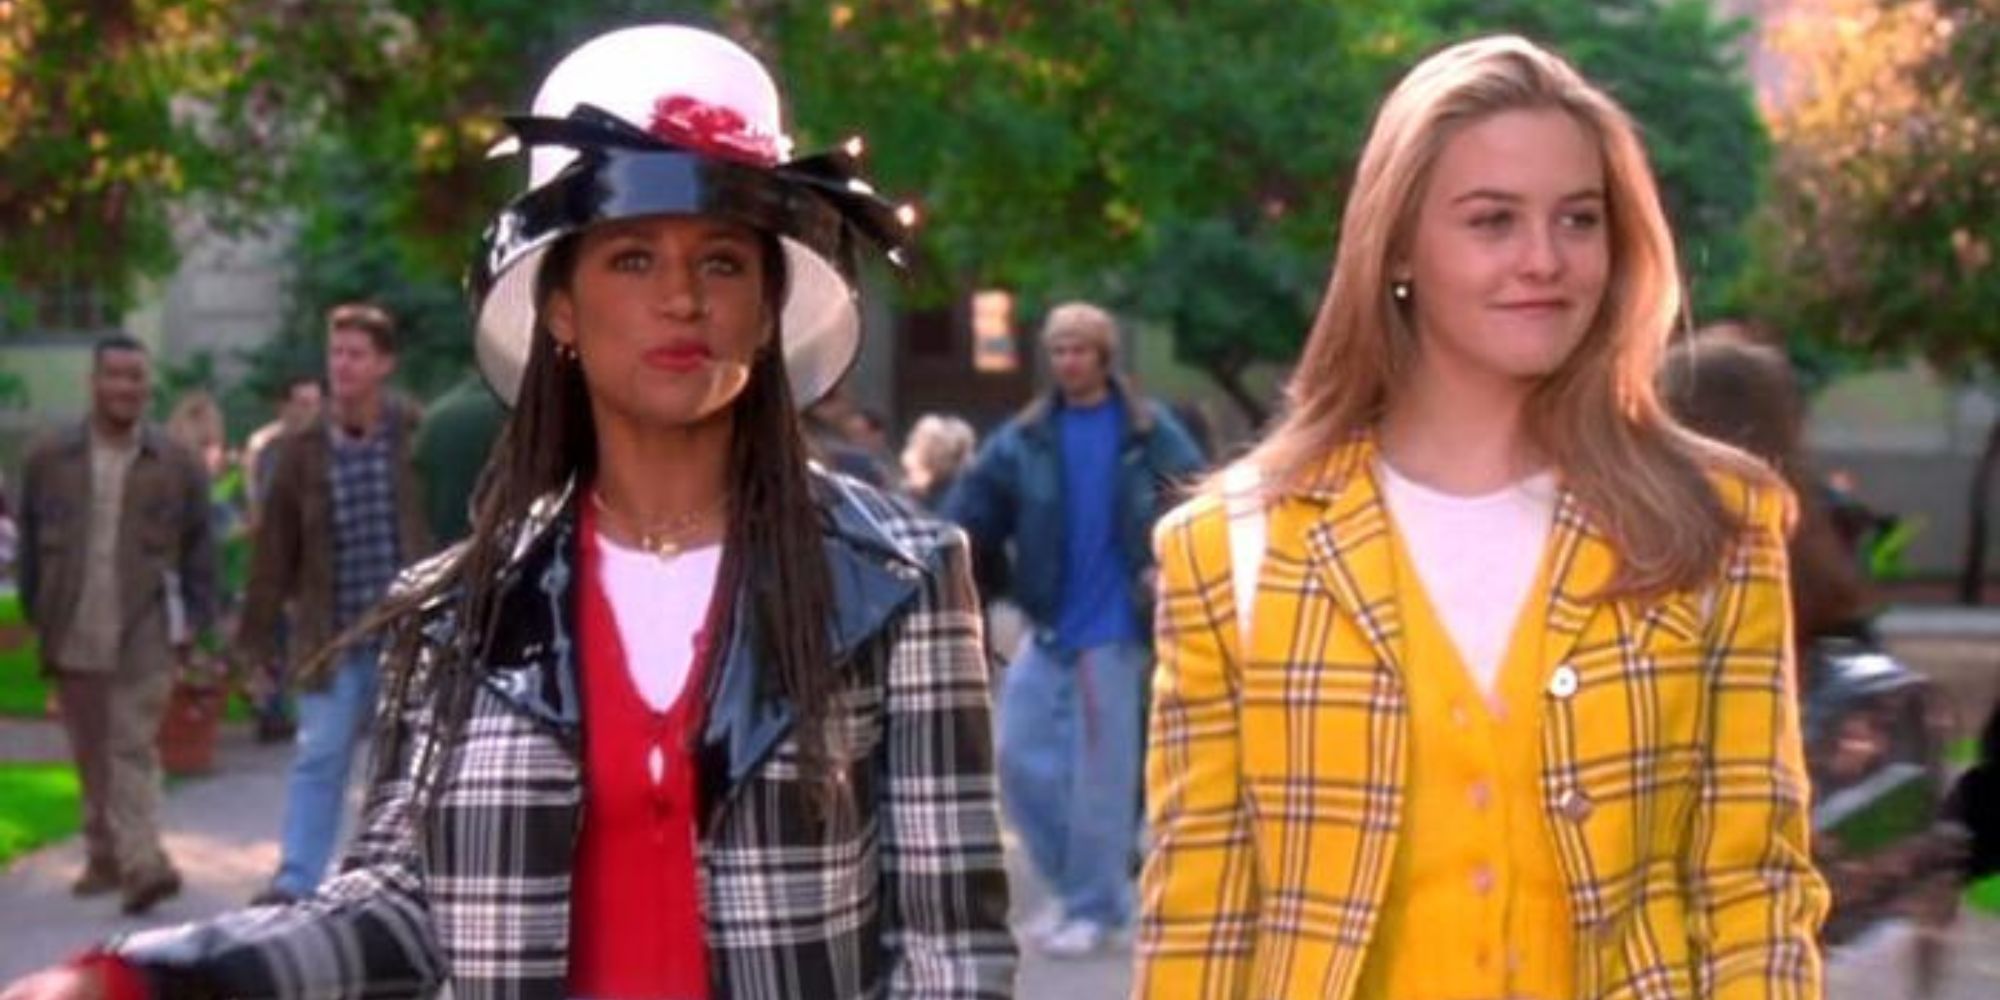 Alicia Silverstone and Brittany Murphy walking to school together